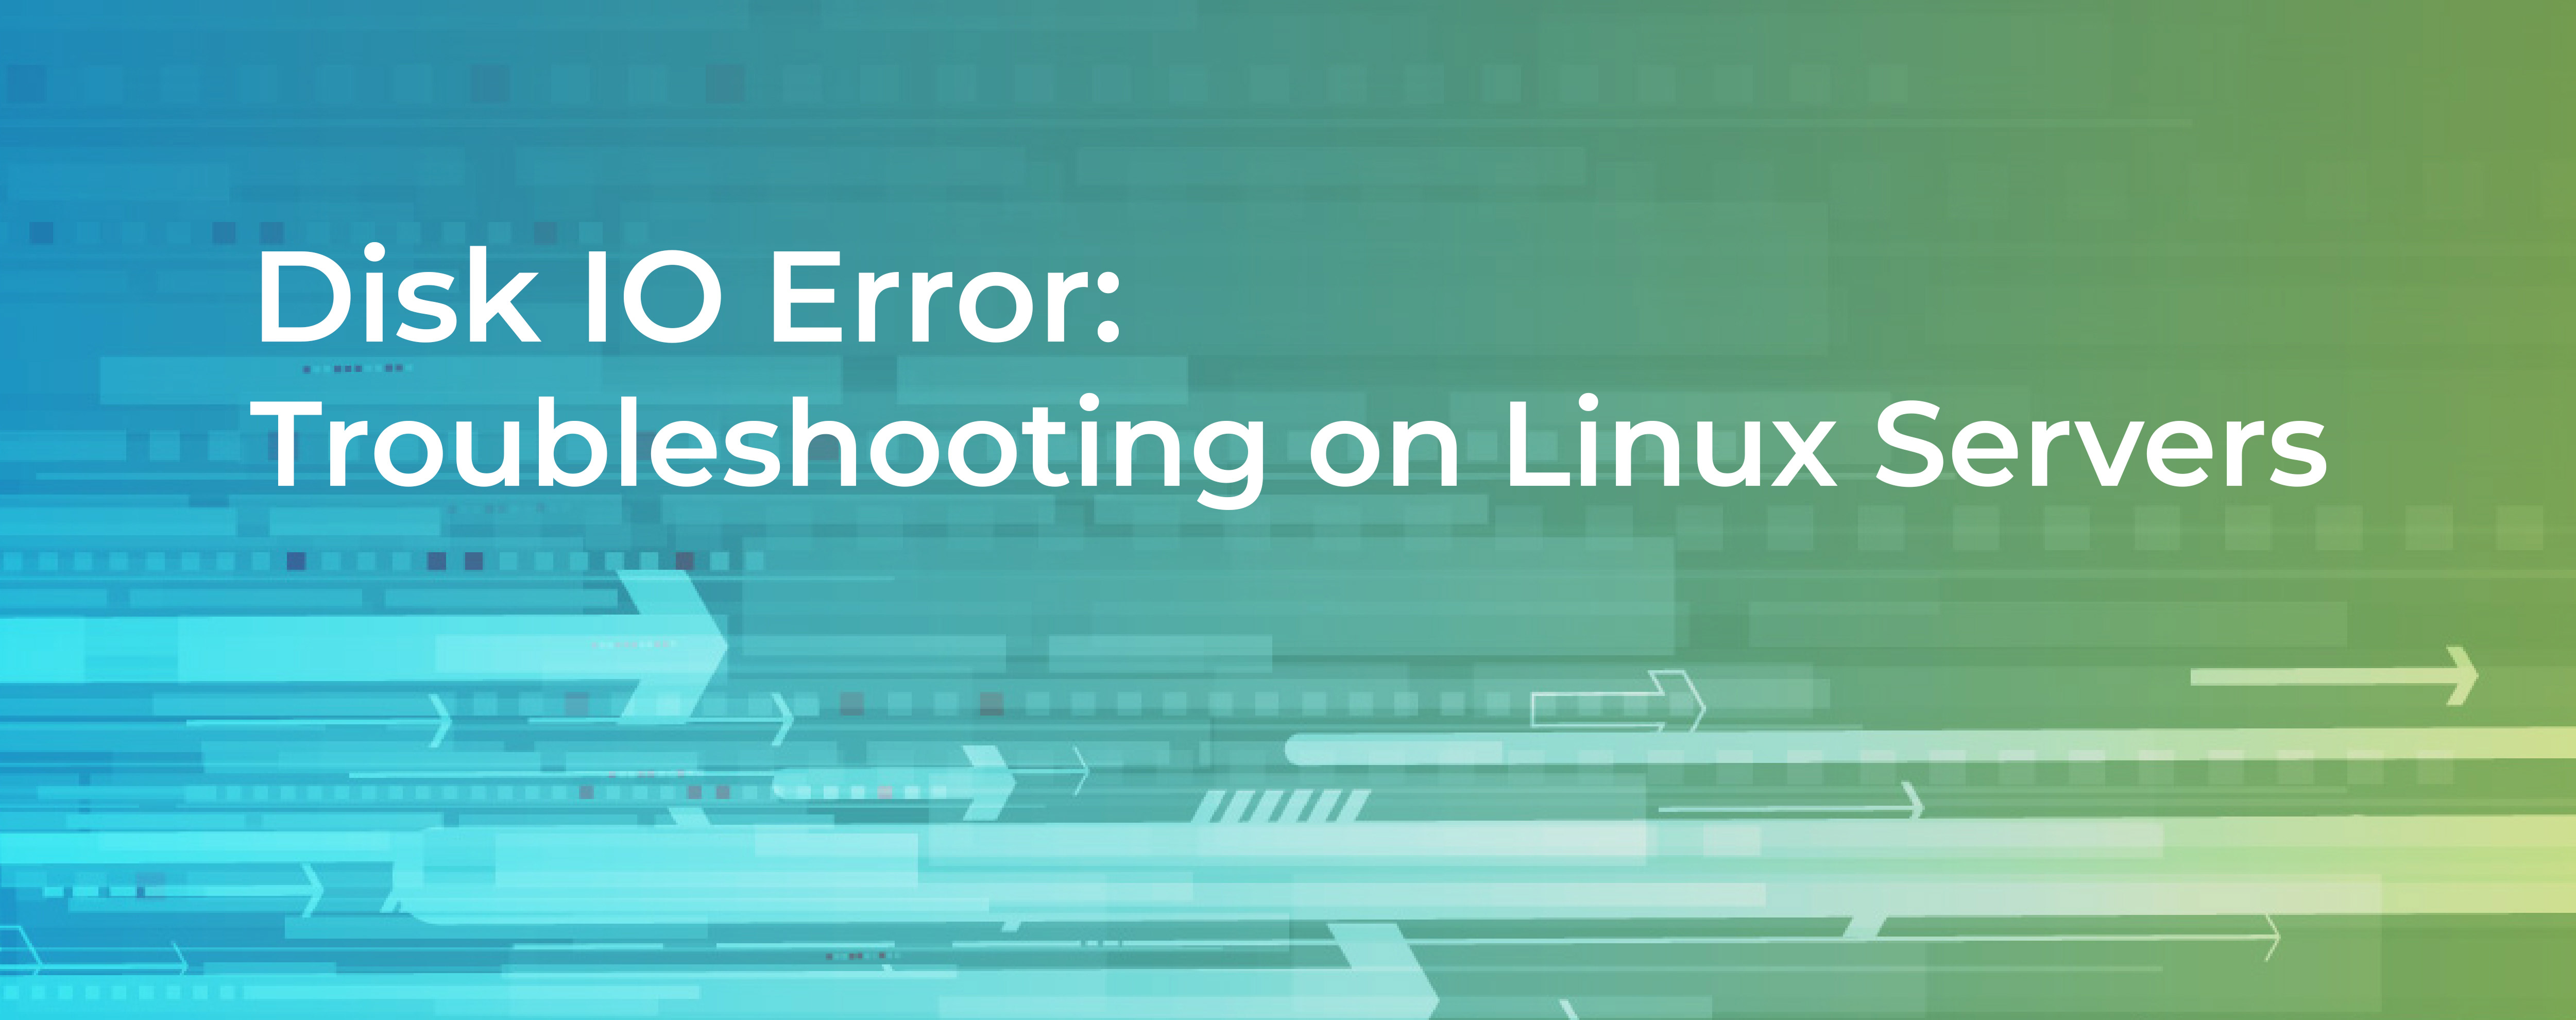 linux server slow troubleshooting